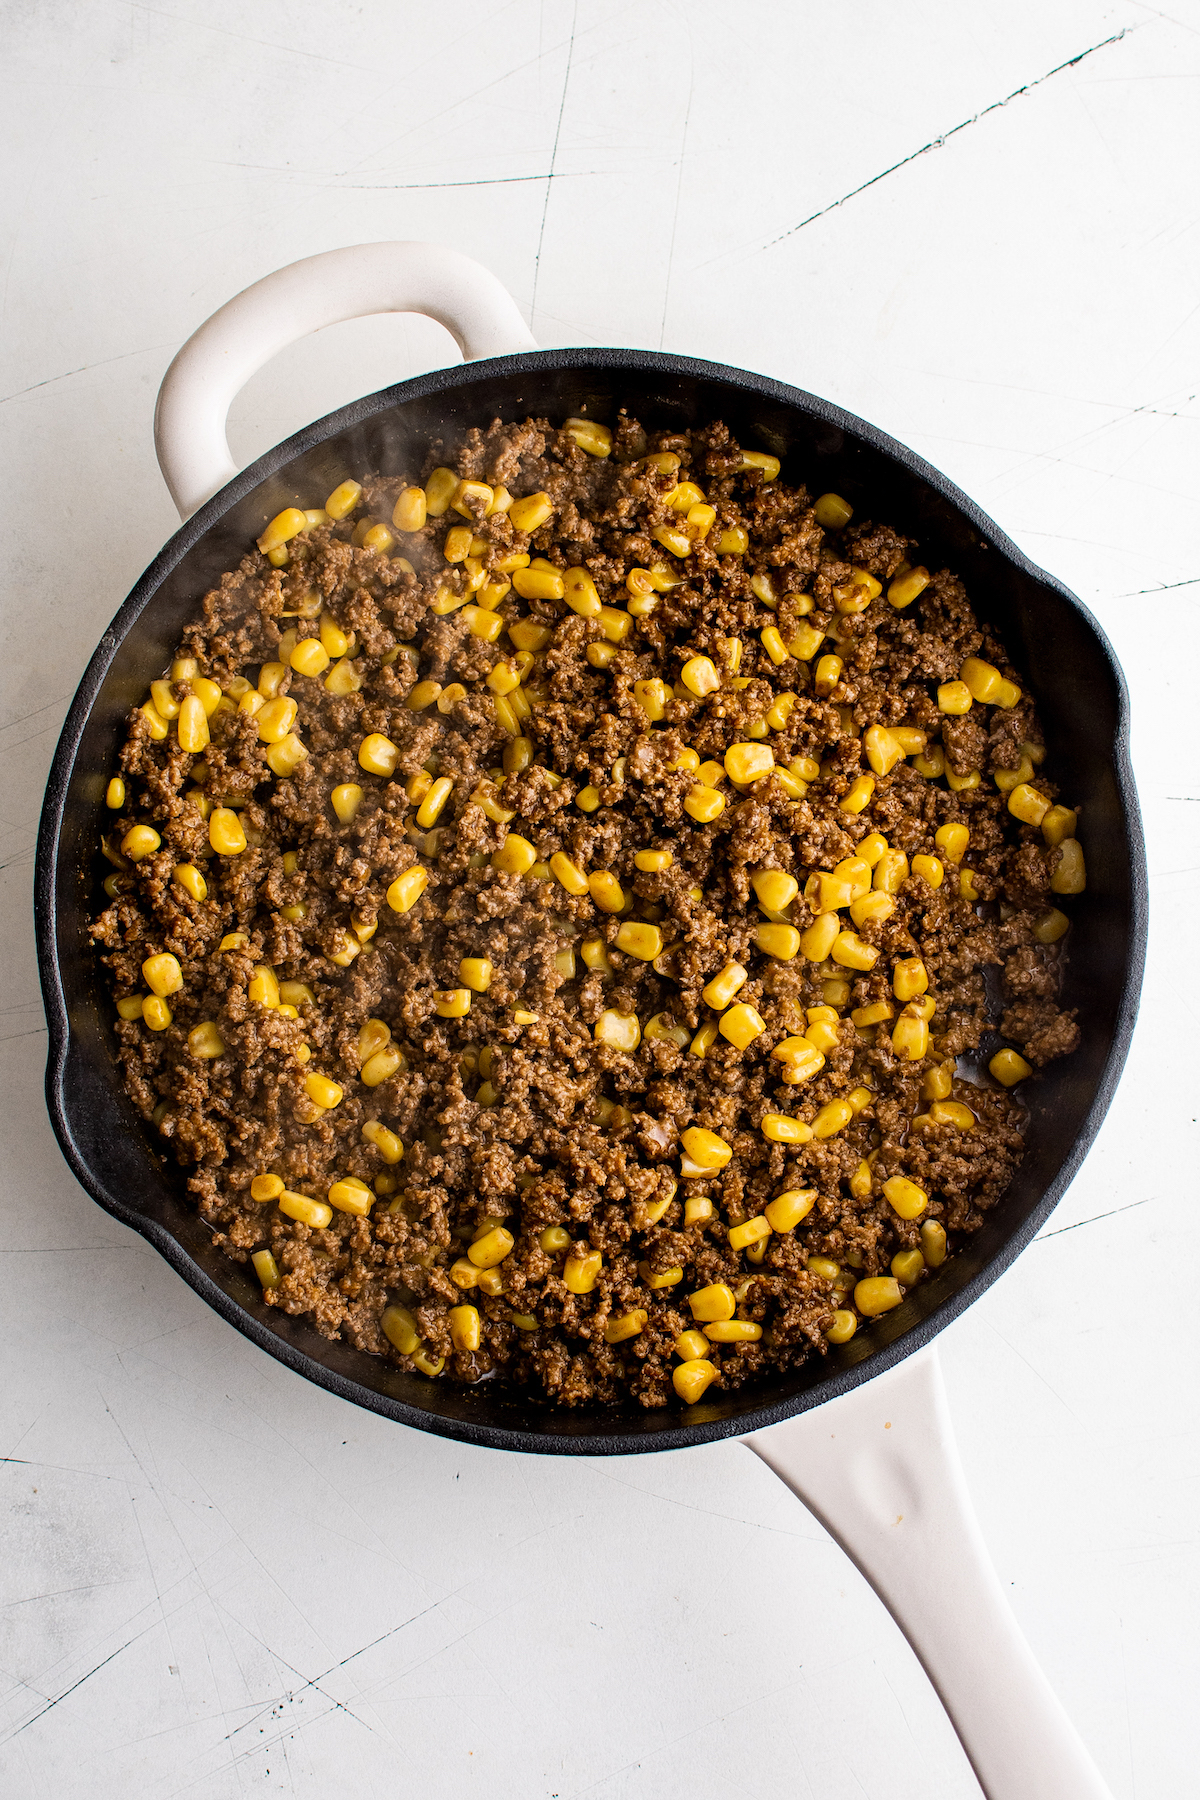 Ground beef, corn, and taco seasoning in a skillet.